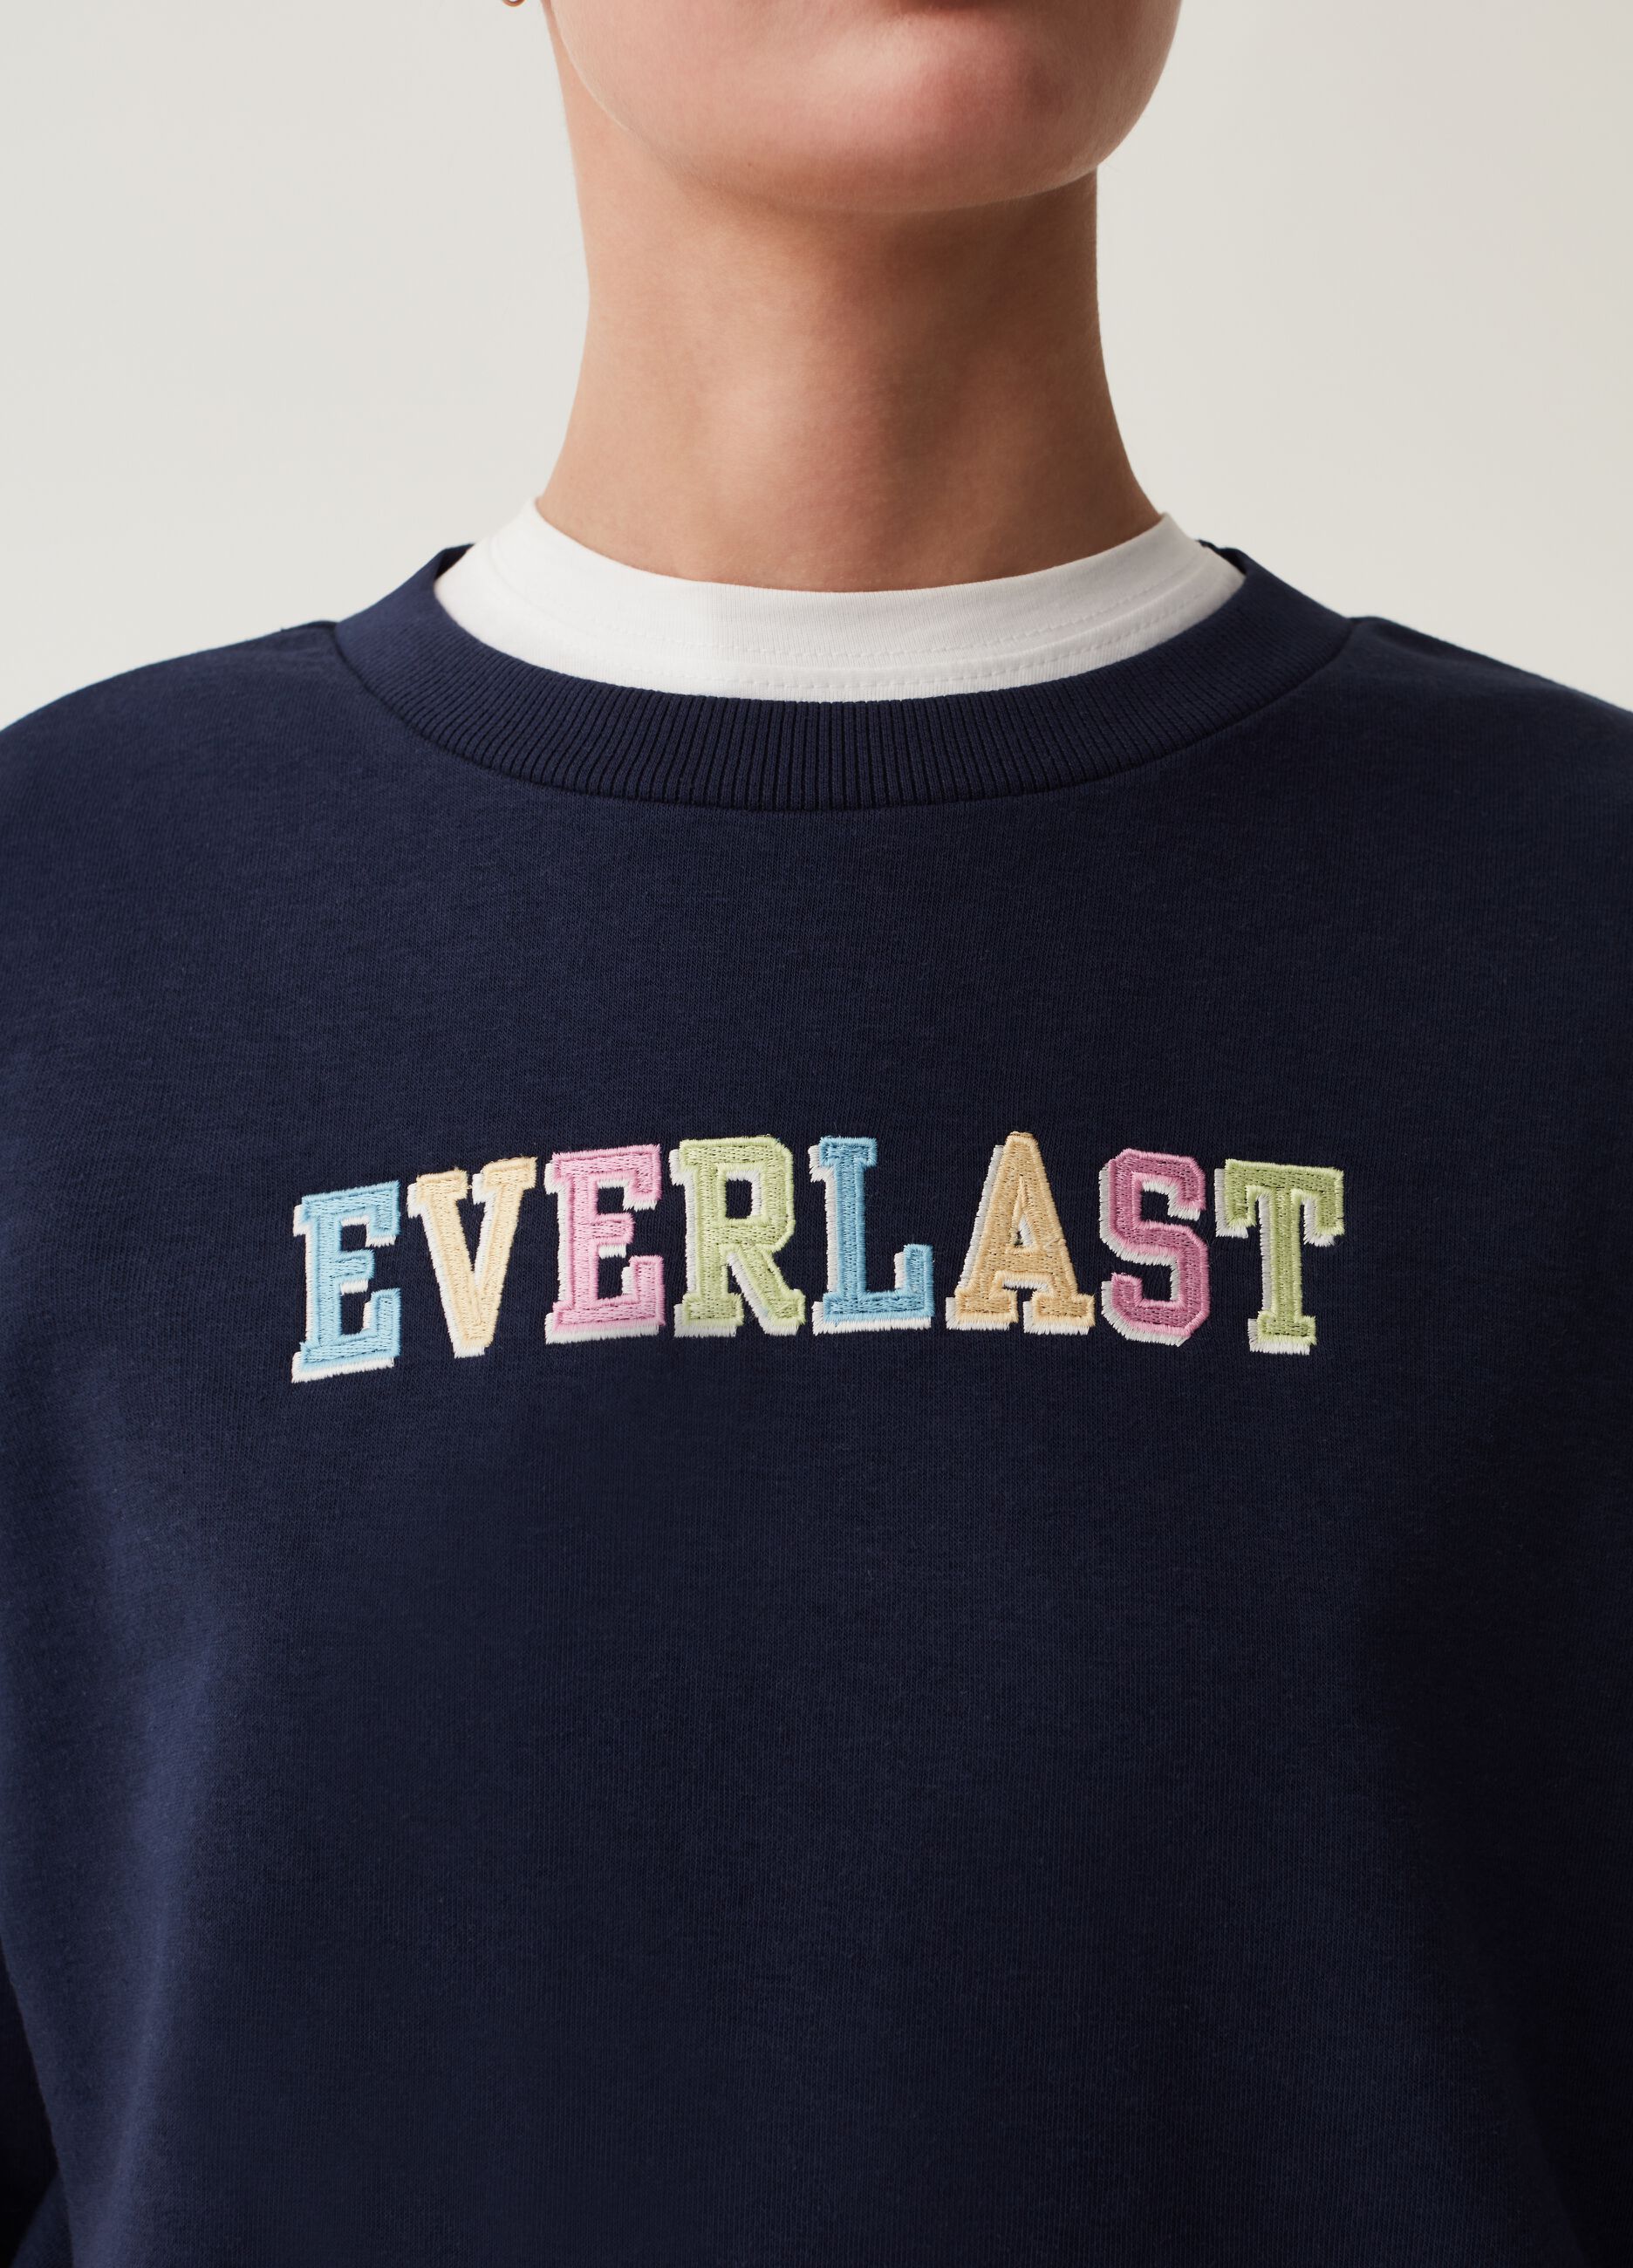 Everlast sweatshirt with embroidery and round neck